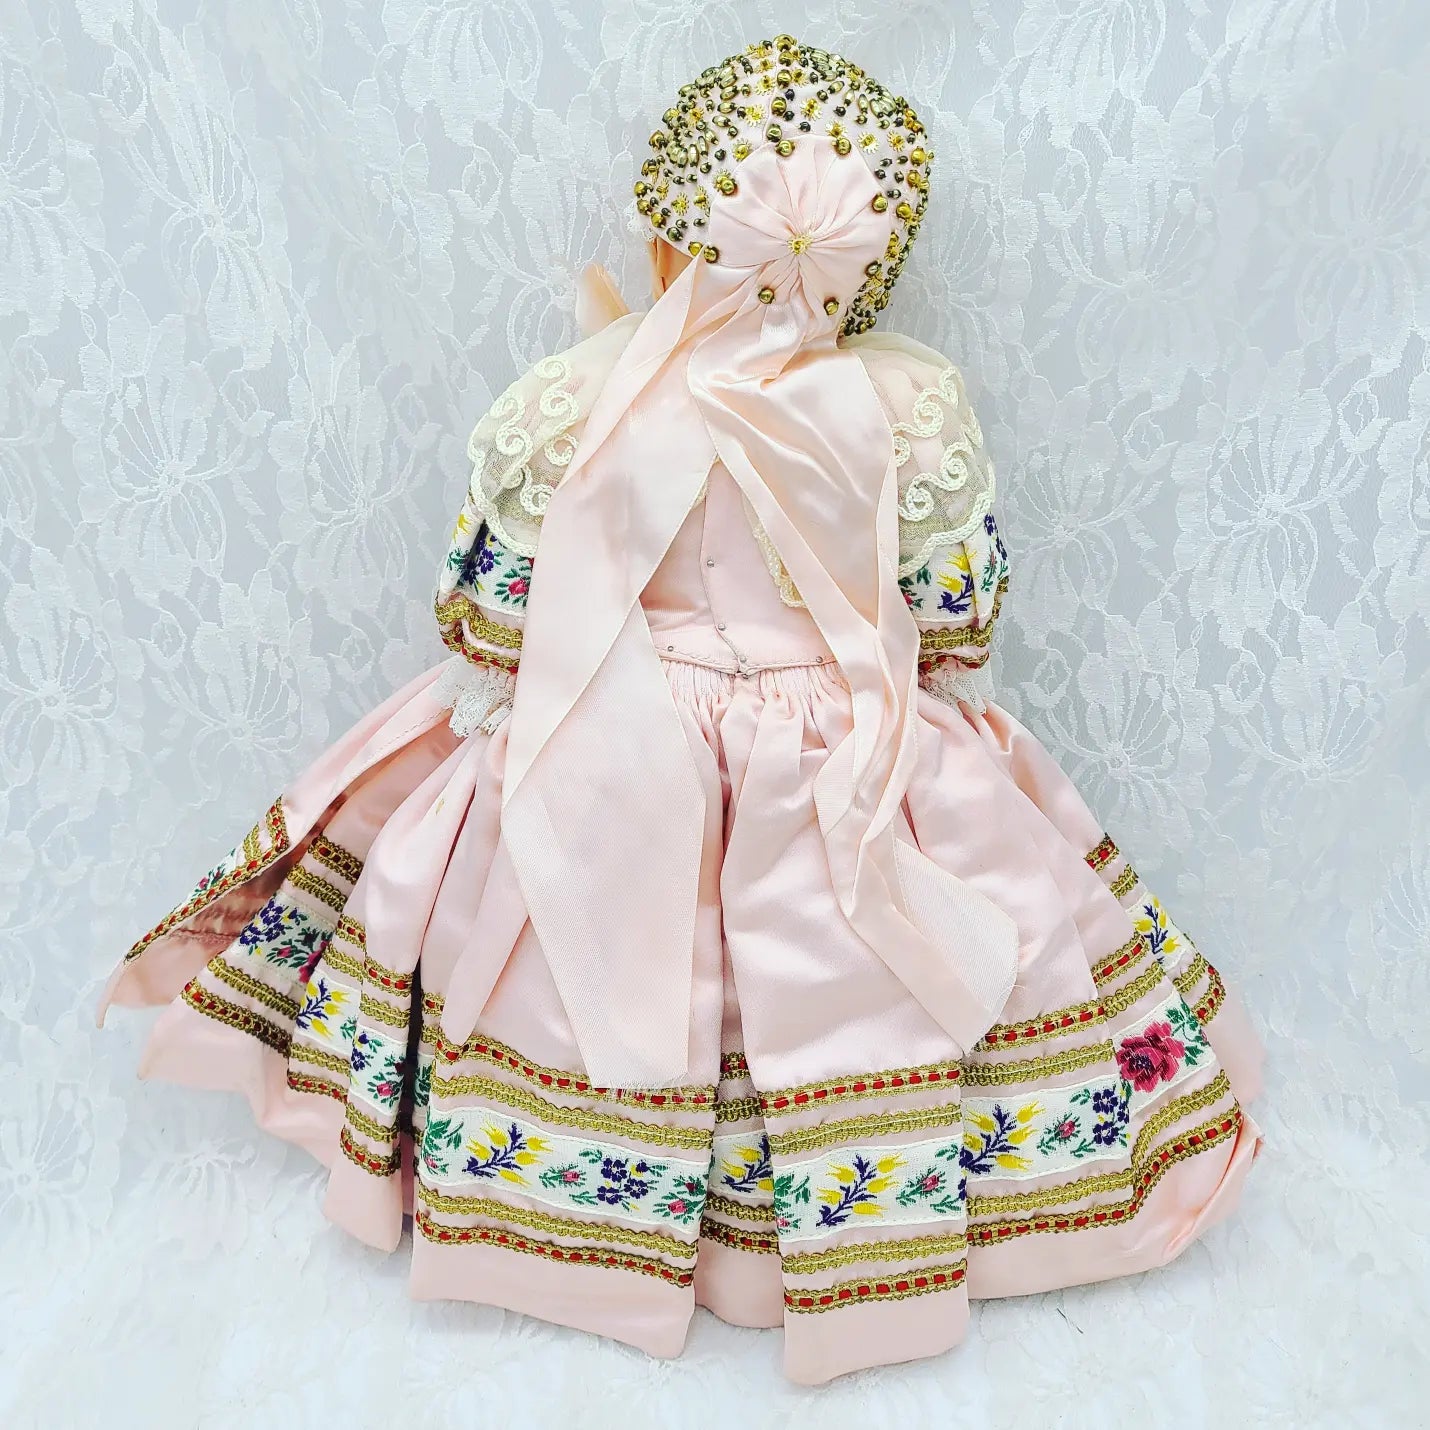 Pierrette Haunted Doll ~ 12" Antique CELLULOID Briez Doll 1940s-50s ~ Paranormal ~ Adult Spirit ~ Very Communicative